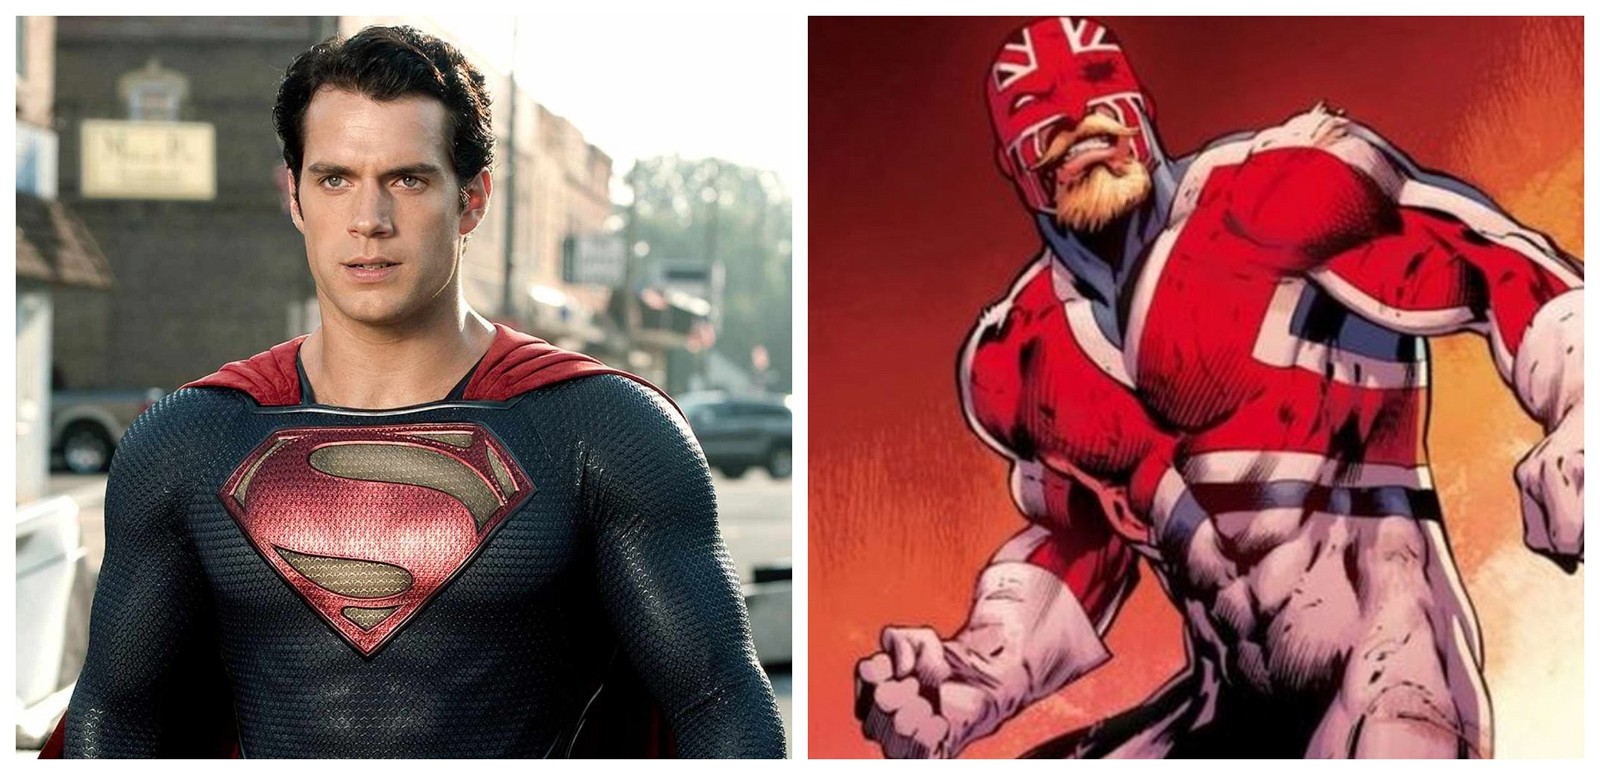 Henry Cavill as Superman and Captain Britain in Comics